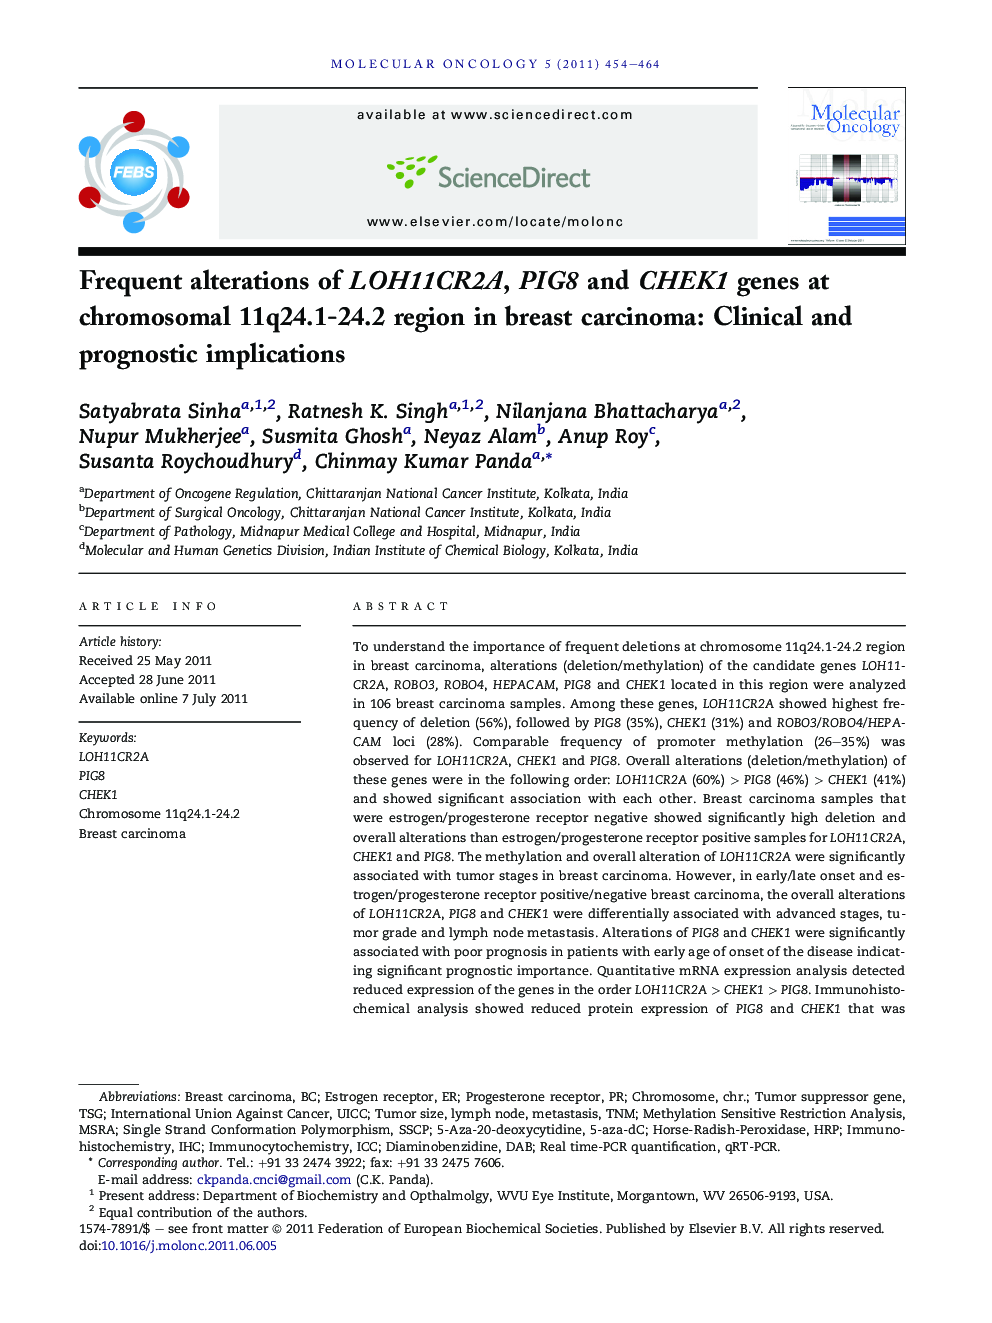 Frequent alterations of LOH11CR2A, PIG8 and CHEK1 genes at chromosomal 11q24.1-24.2 region in breast carcinoma: Clinical and prognostic implications